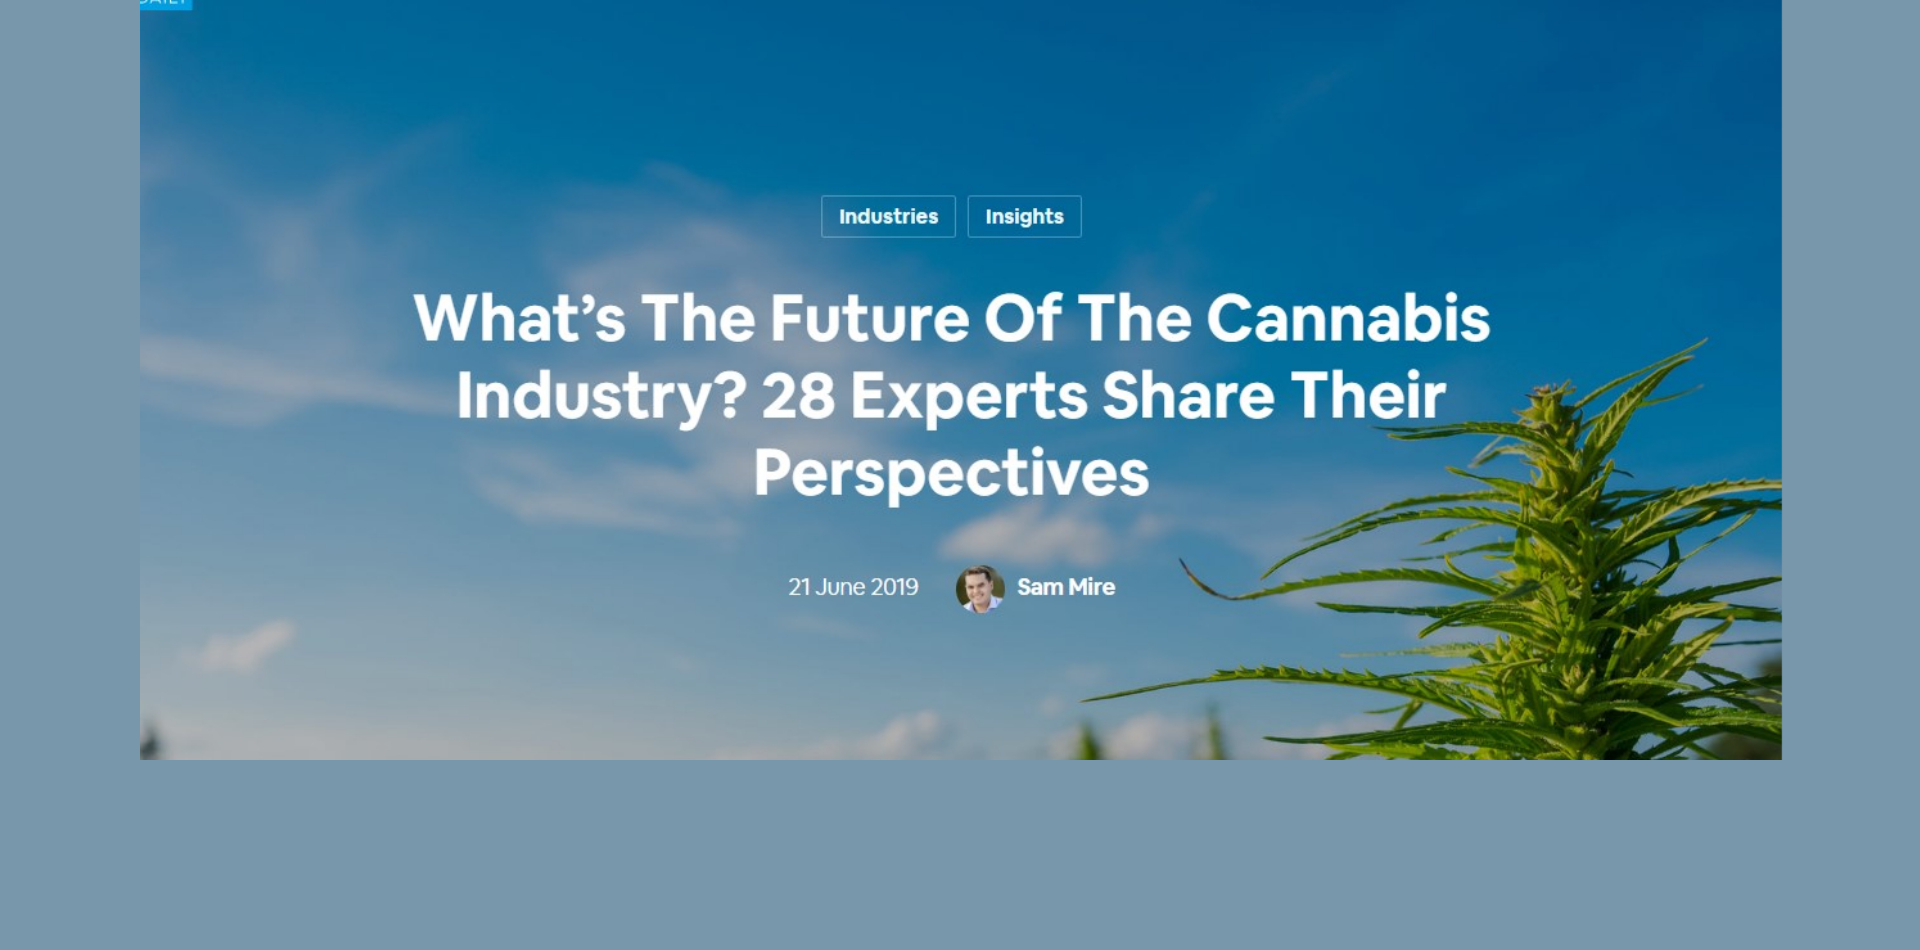 What’s The Future Of The Cannabis Industry? 28 Experts Share Their Perspectives